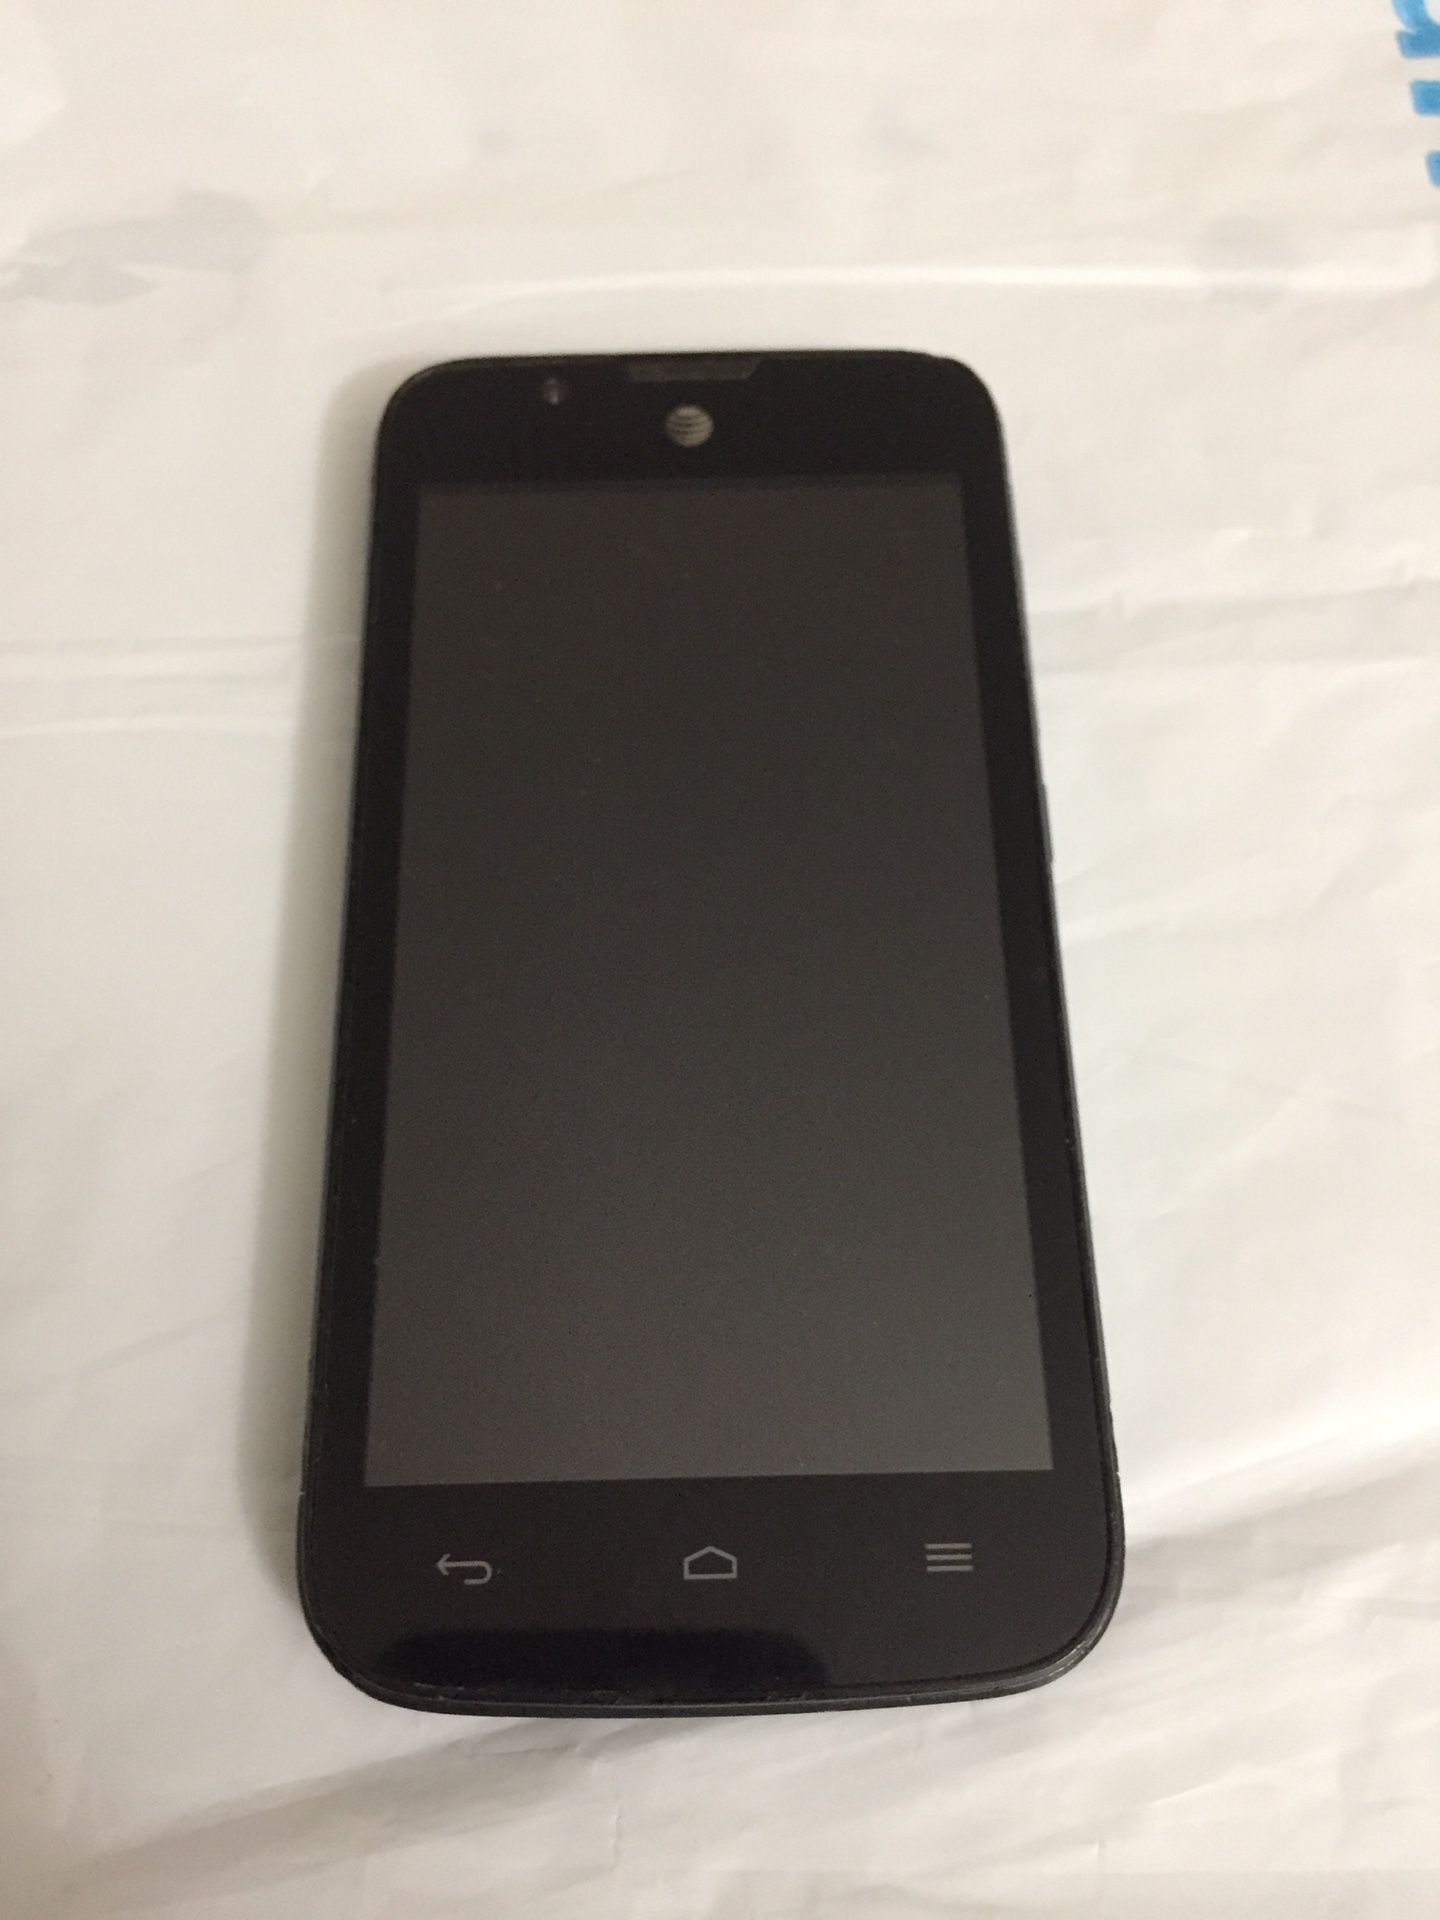 HUAWEI unlocked GSM cell phone, 4.5’ screen size